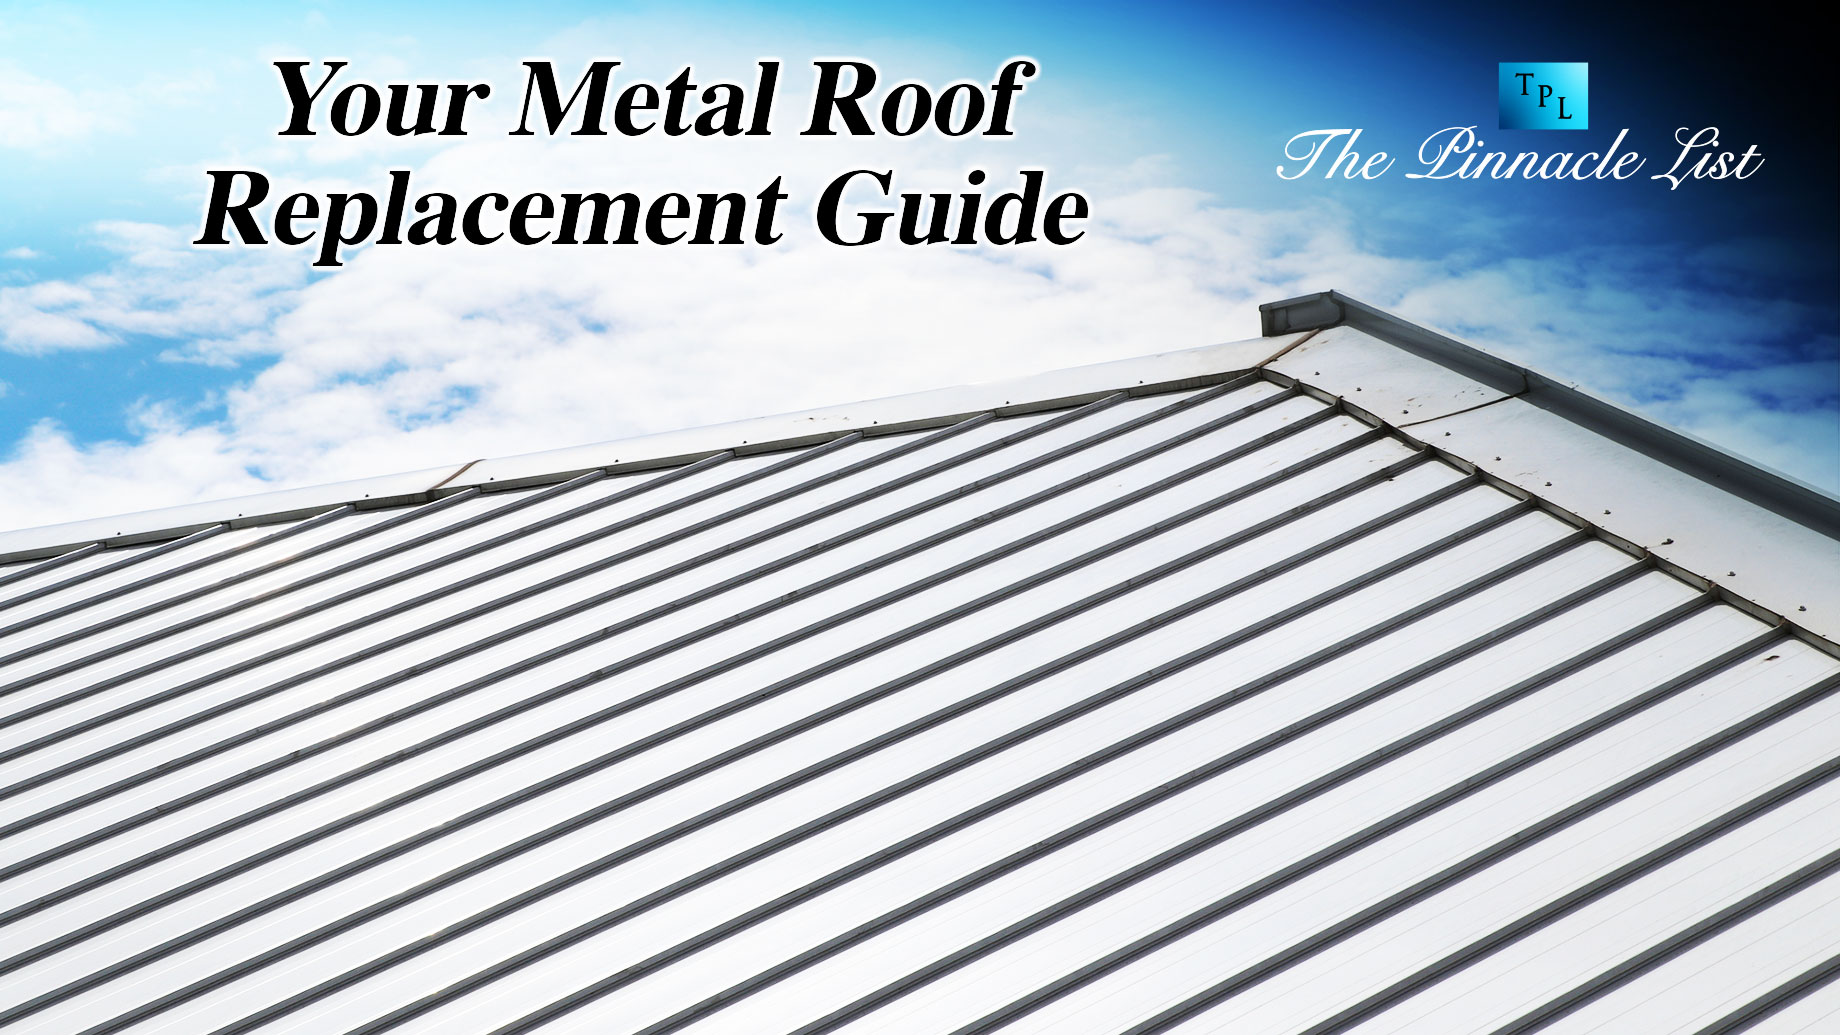 Your Metal Roof
Replacement Guide